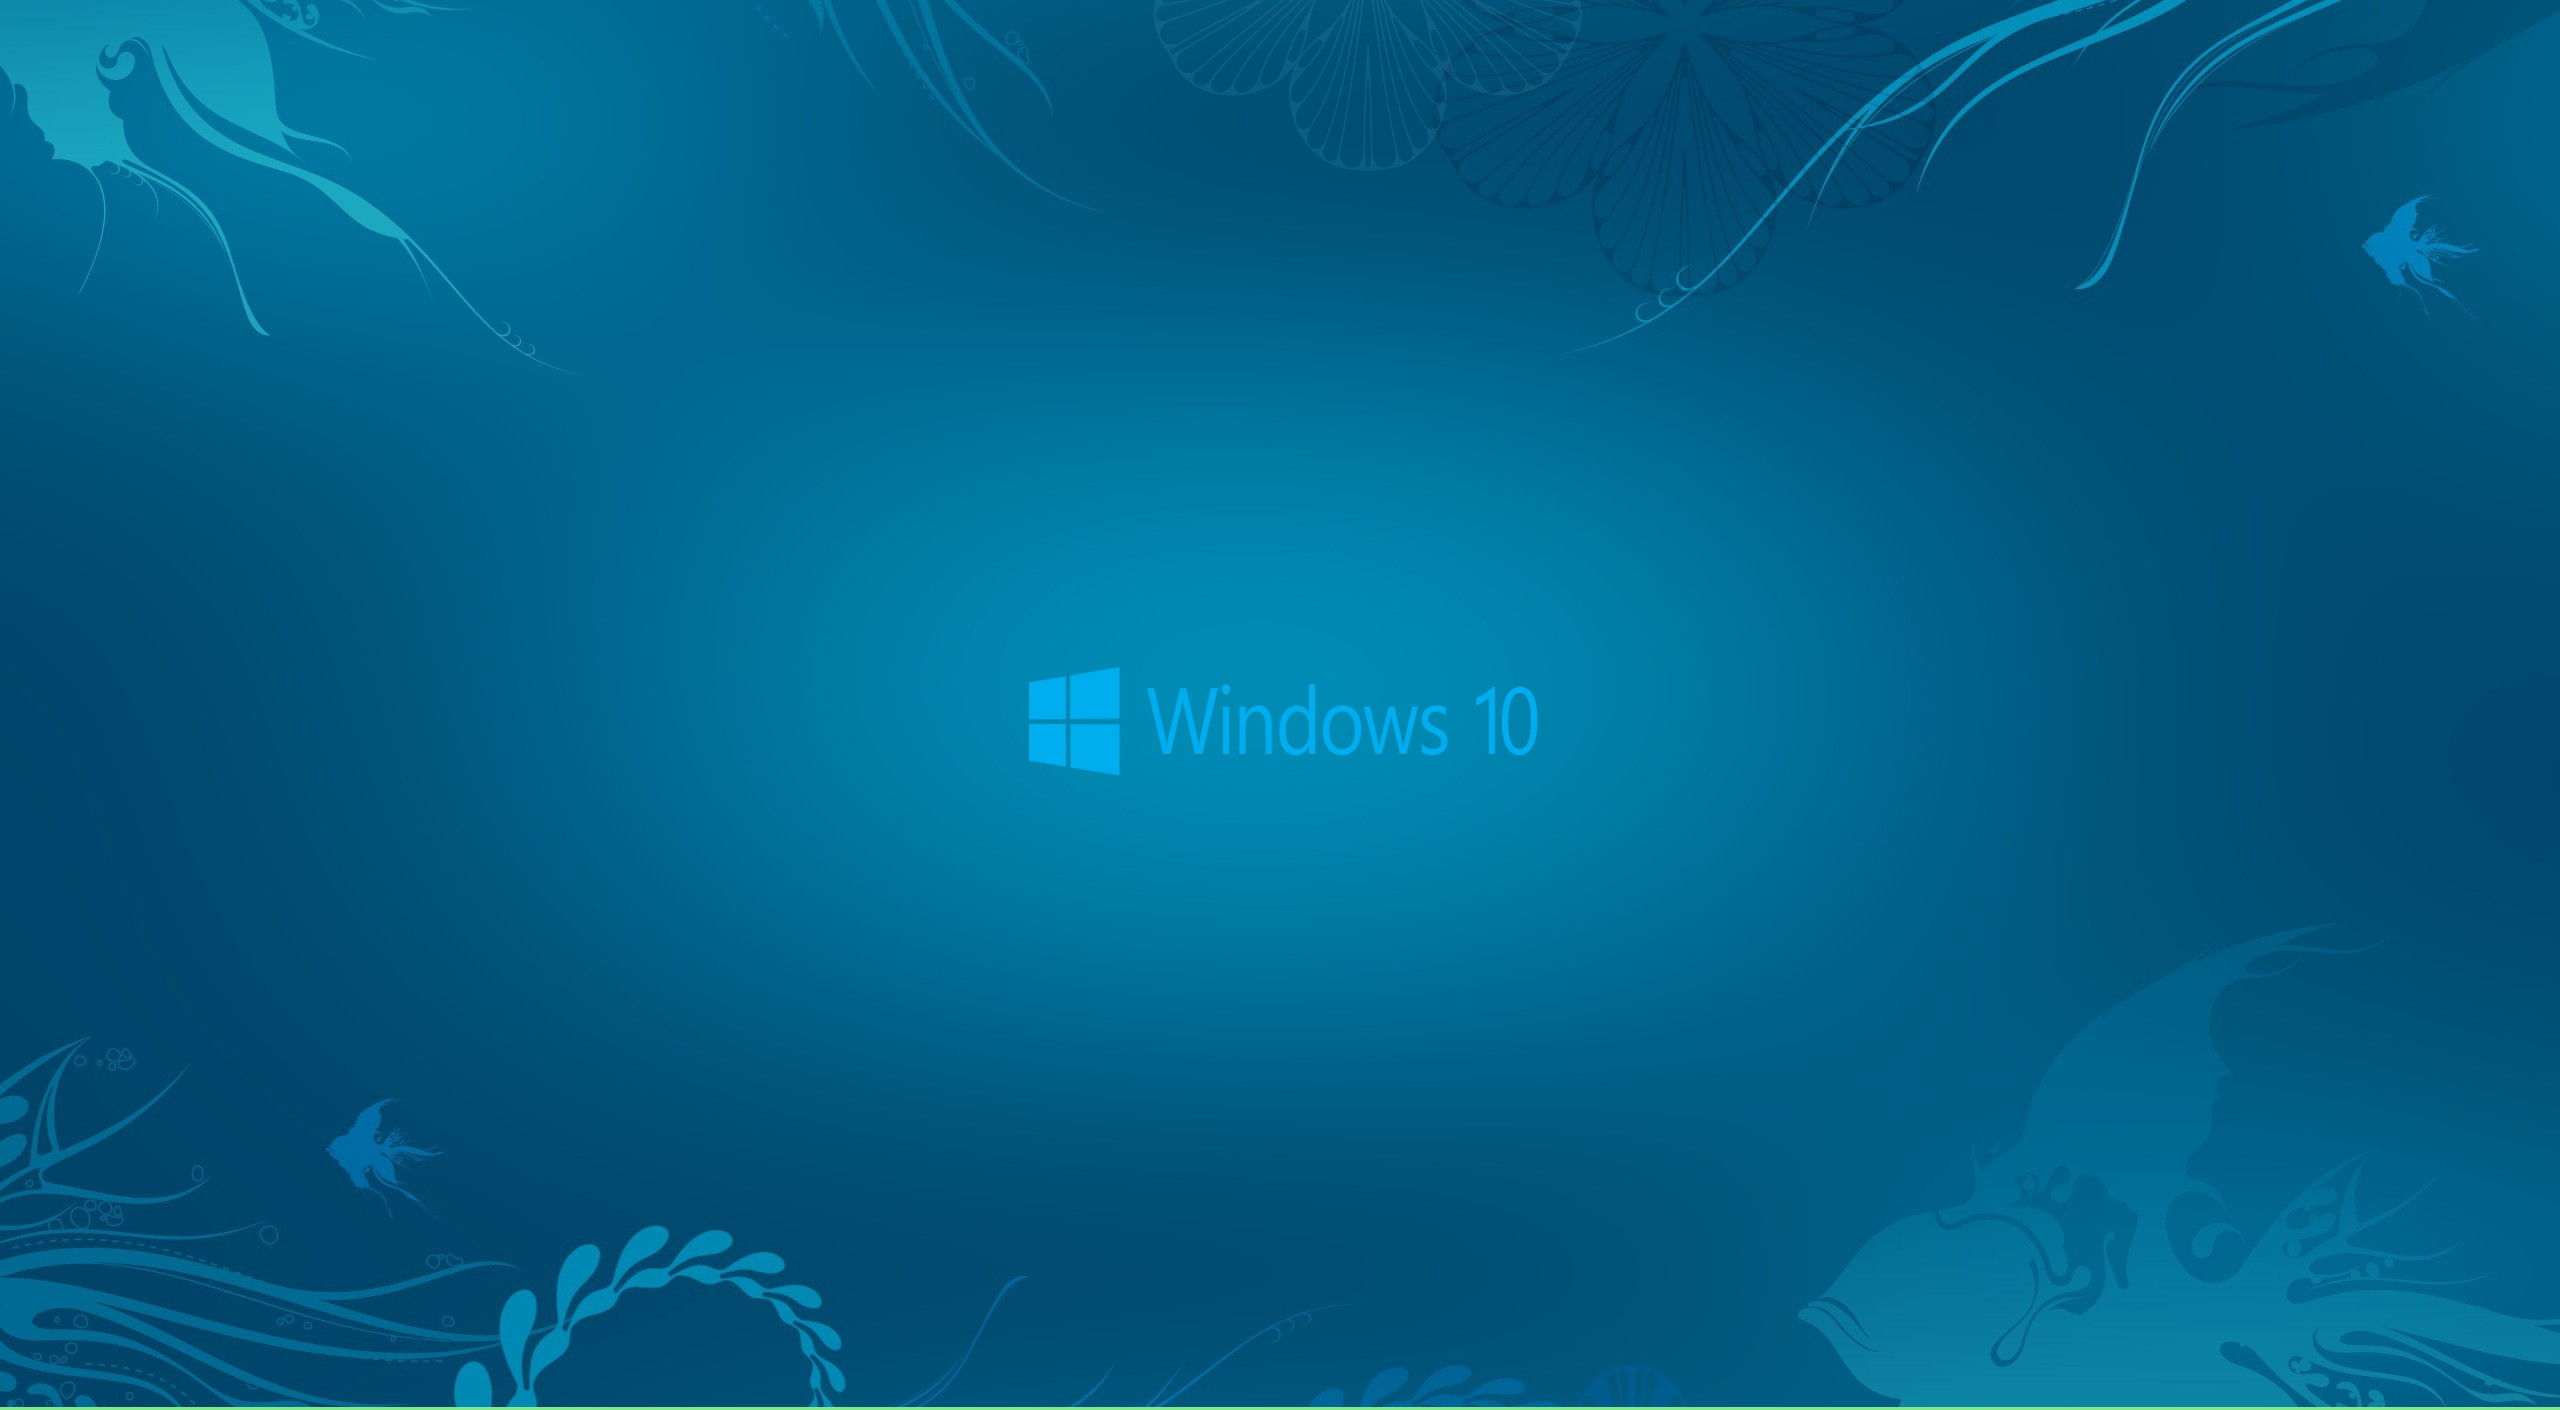 2560x1410 Windows 10 Wallpaper with new logo on deep blue sea | HD Wallpapers .